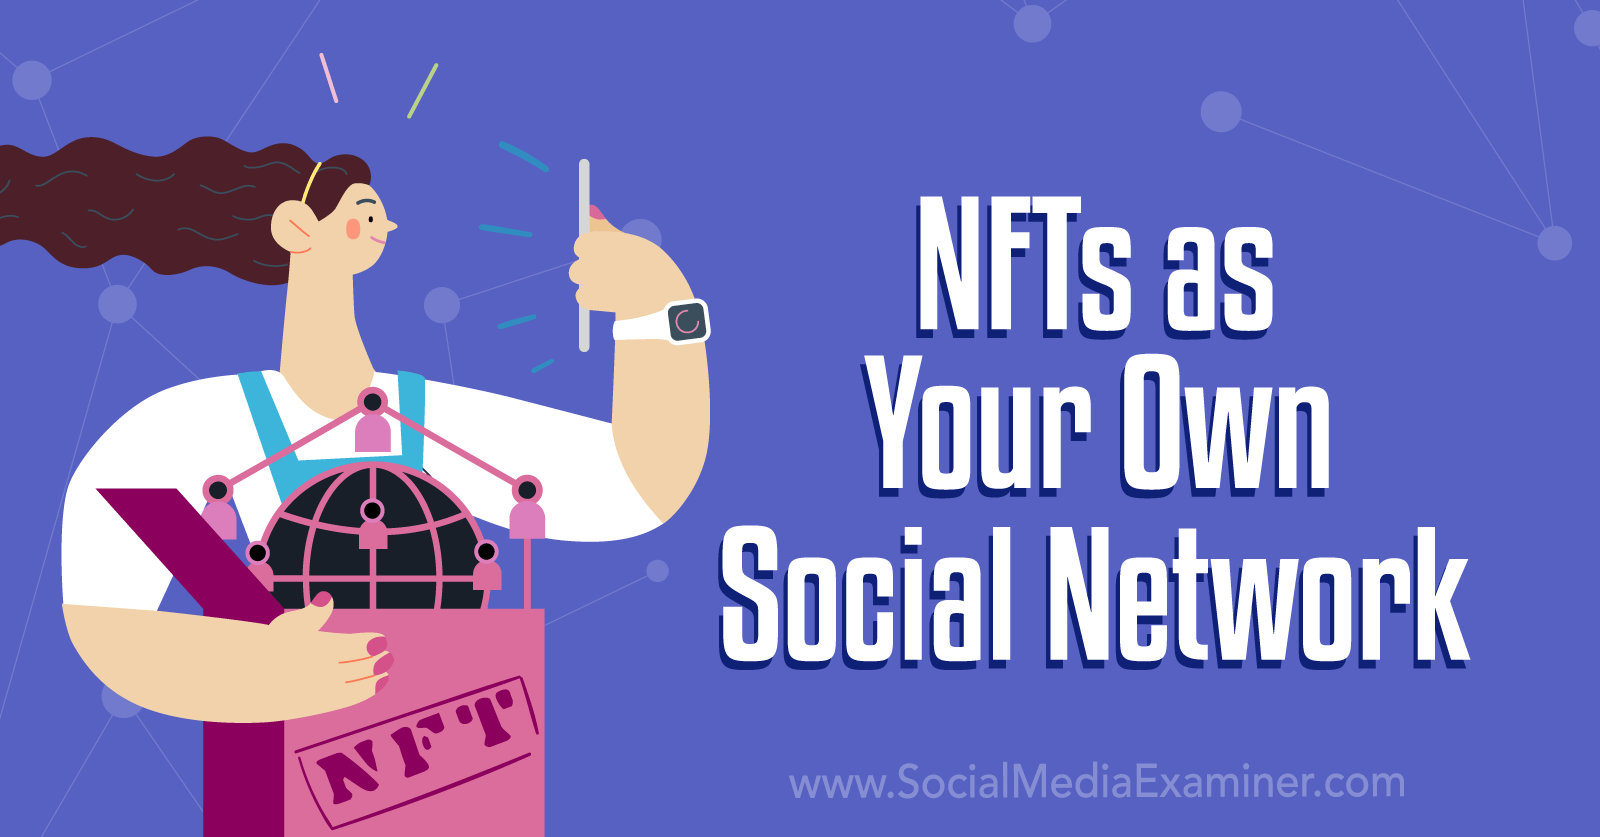 NFTs as Your Own Social Network featuring insights from Jeff Kaufman on the Crypto Business Podcast.